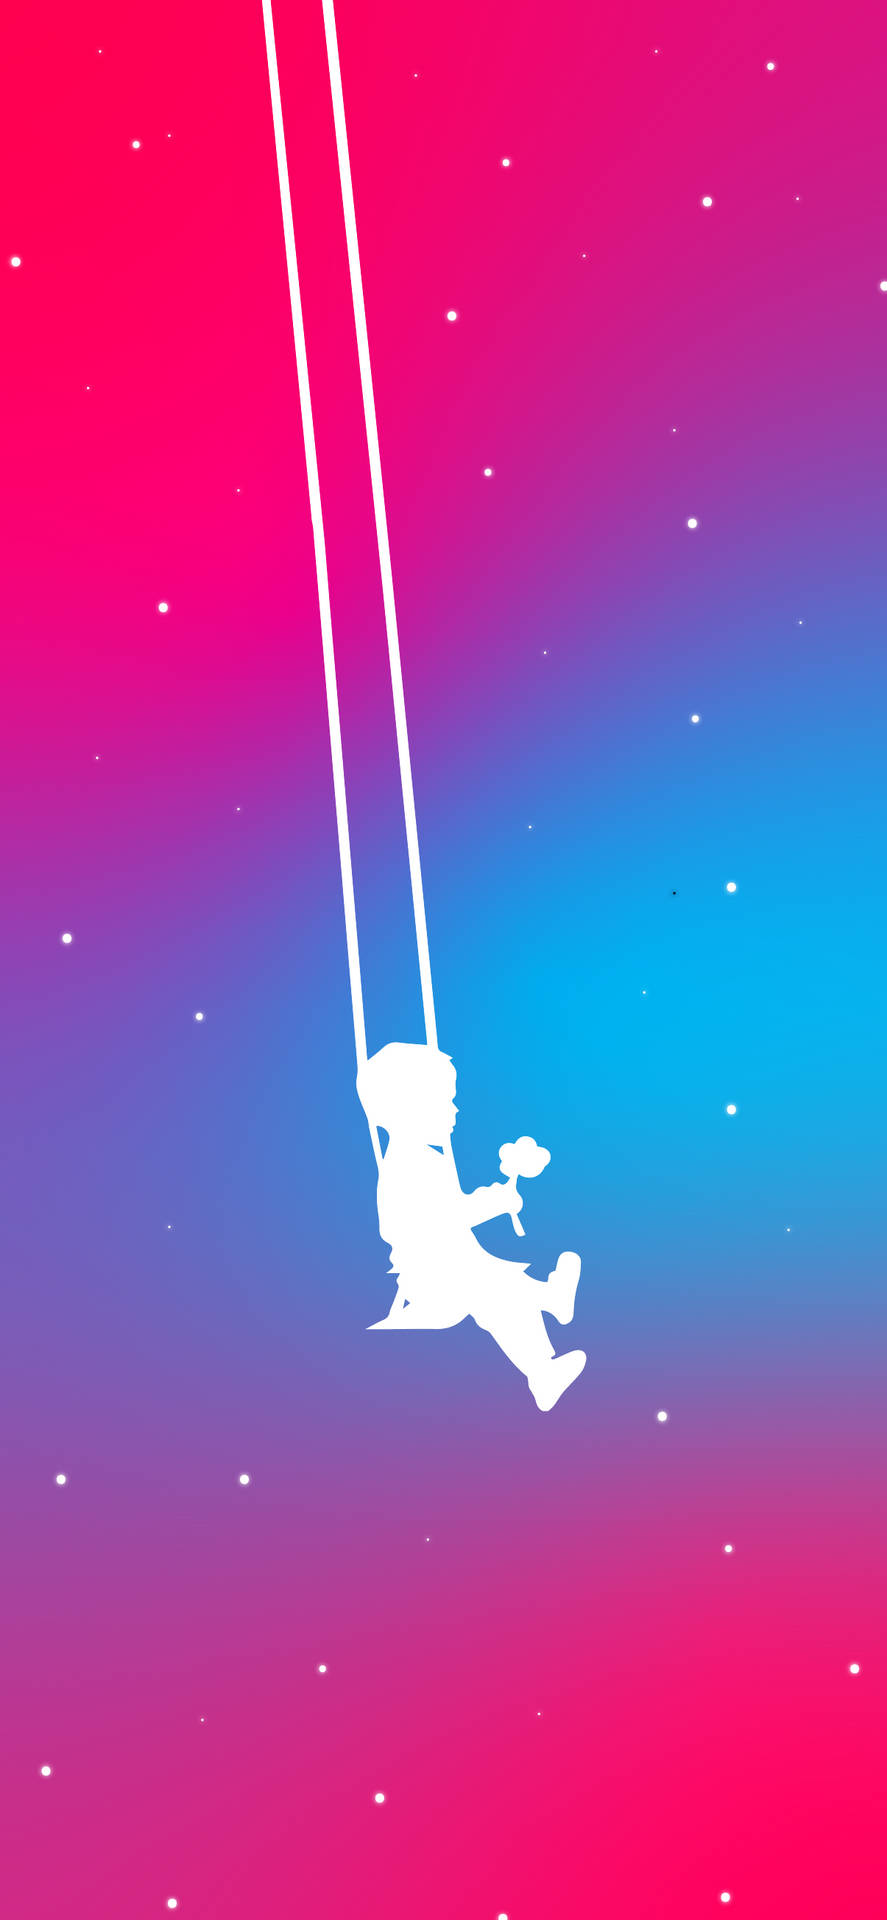 Pink And Blue Swing Wallpaper